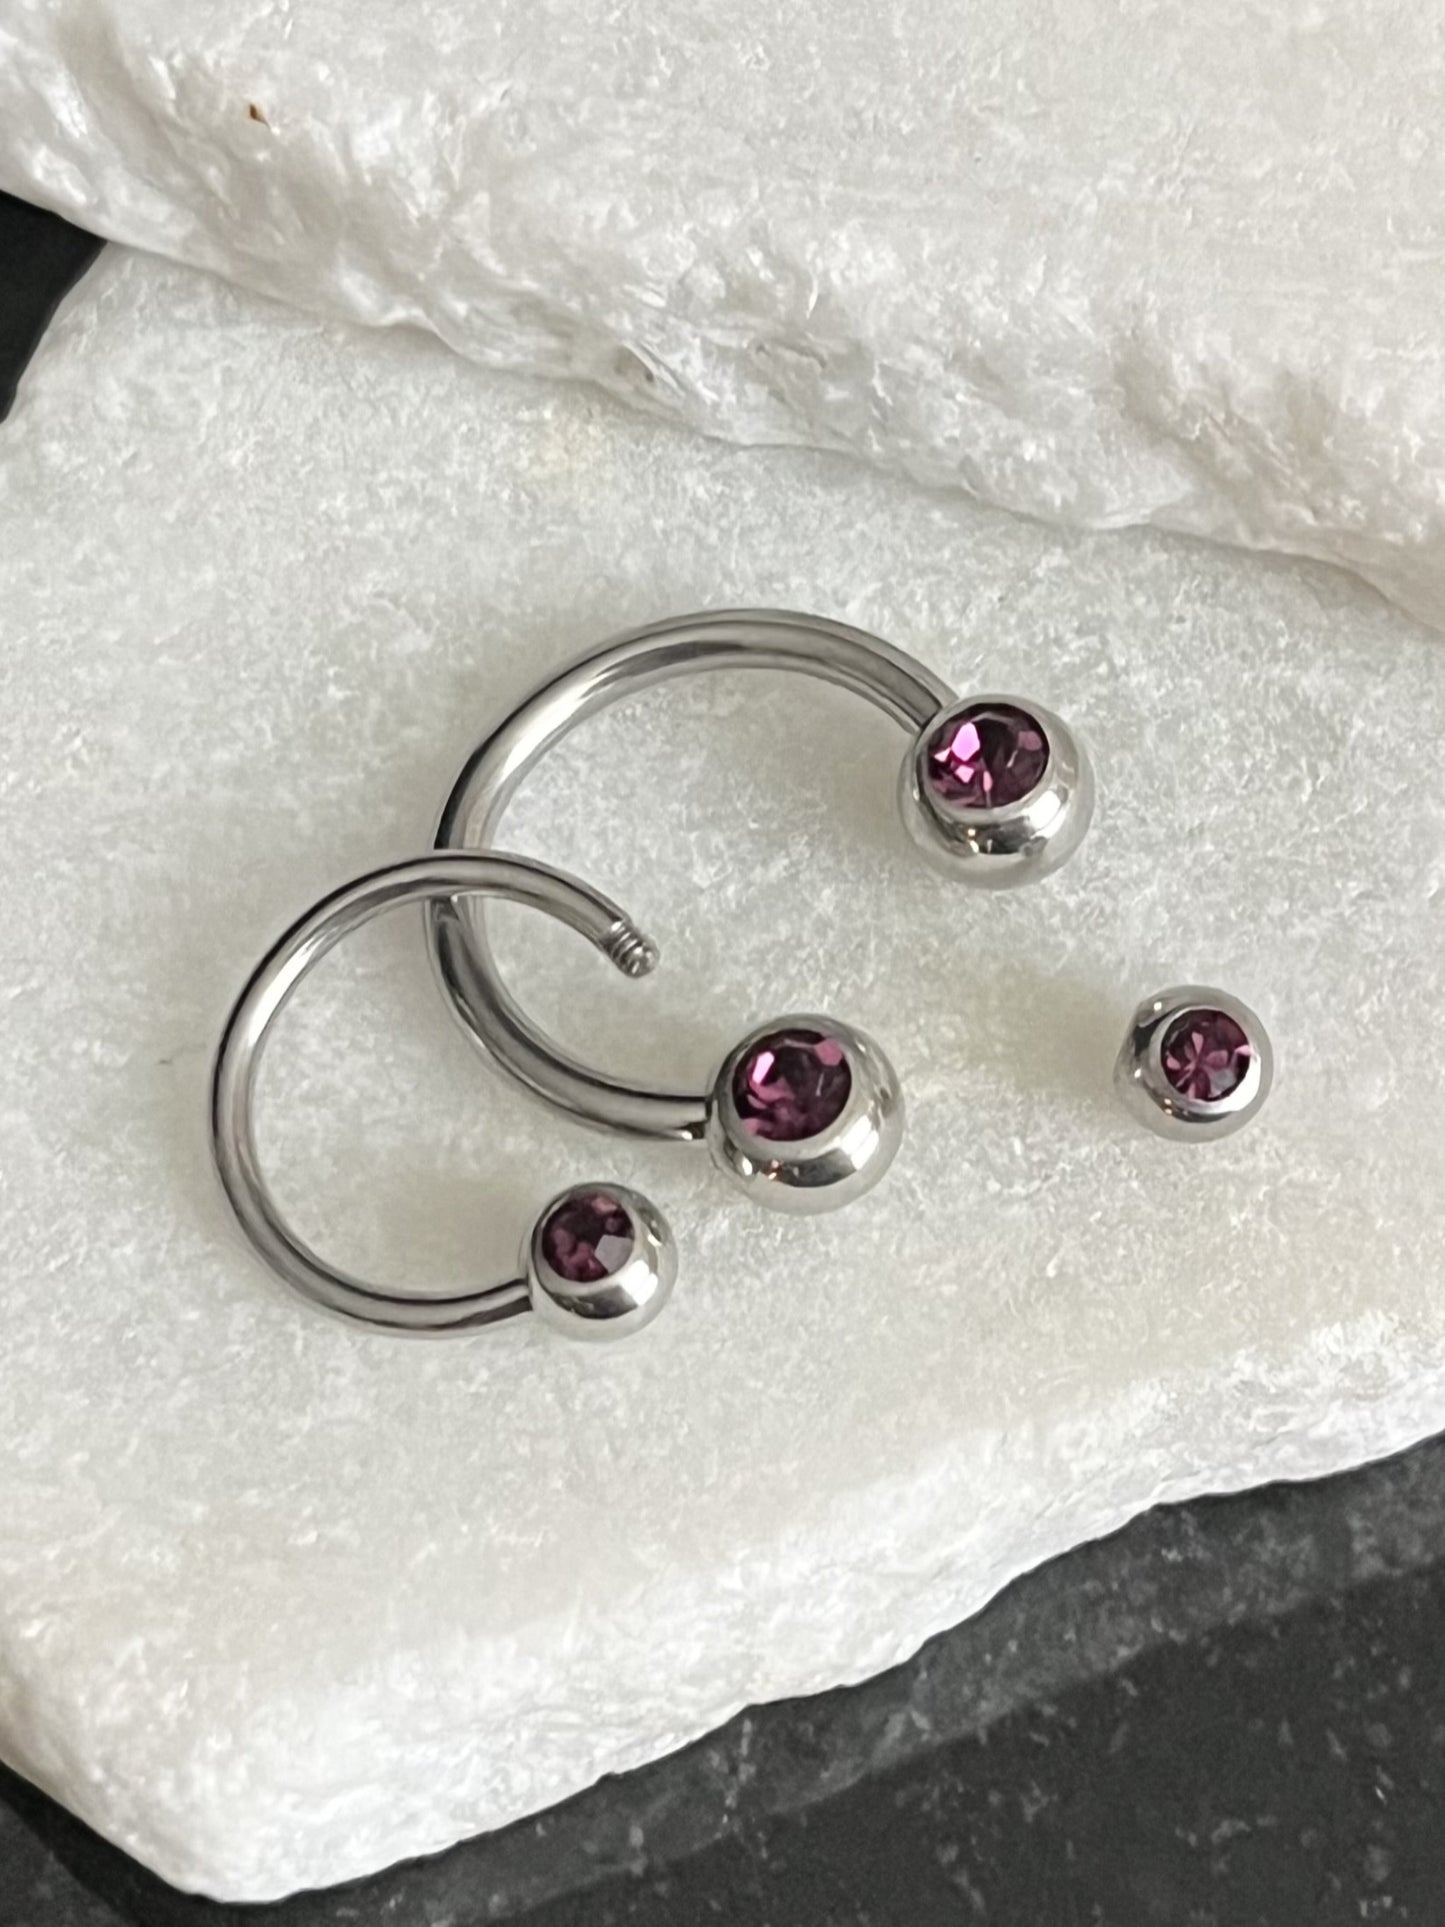 1 Piece Stunning Front Facing CZ Gems 316L Surgical Steel Circular Horseshoe Septum Ring - 16g or 14g - Available in a Variety of Colors!